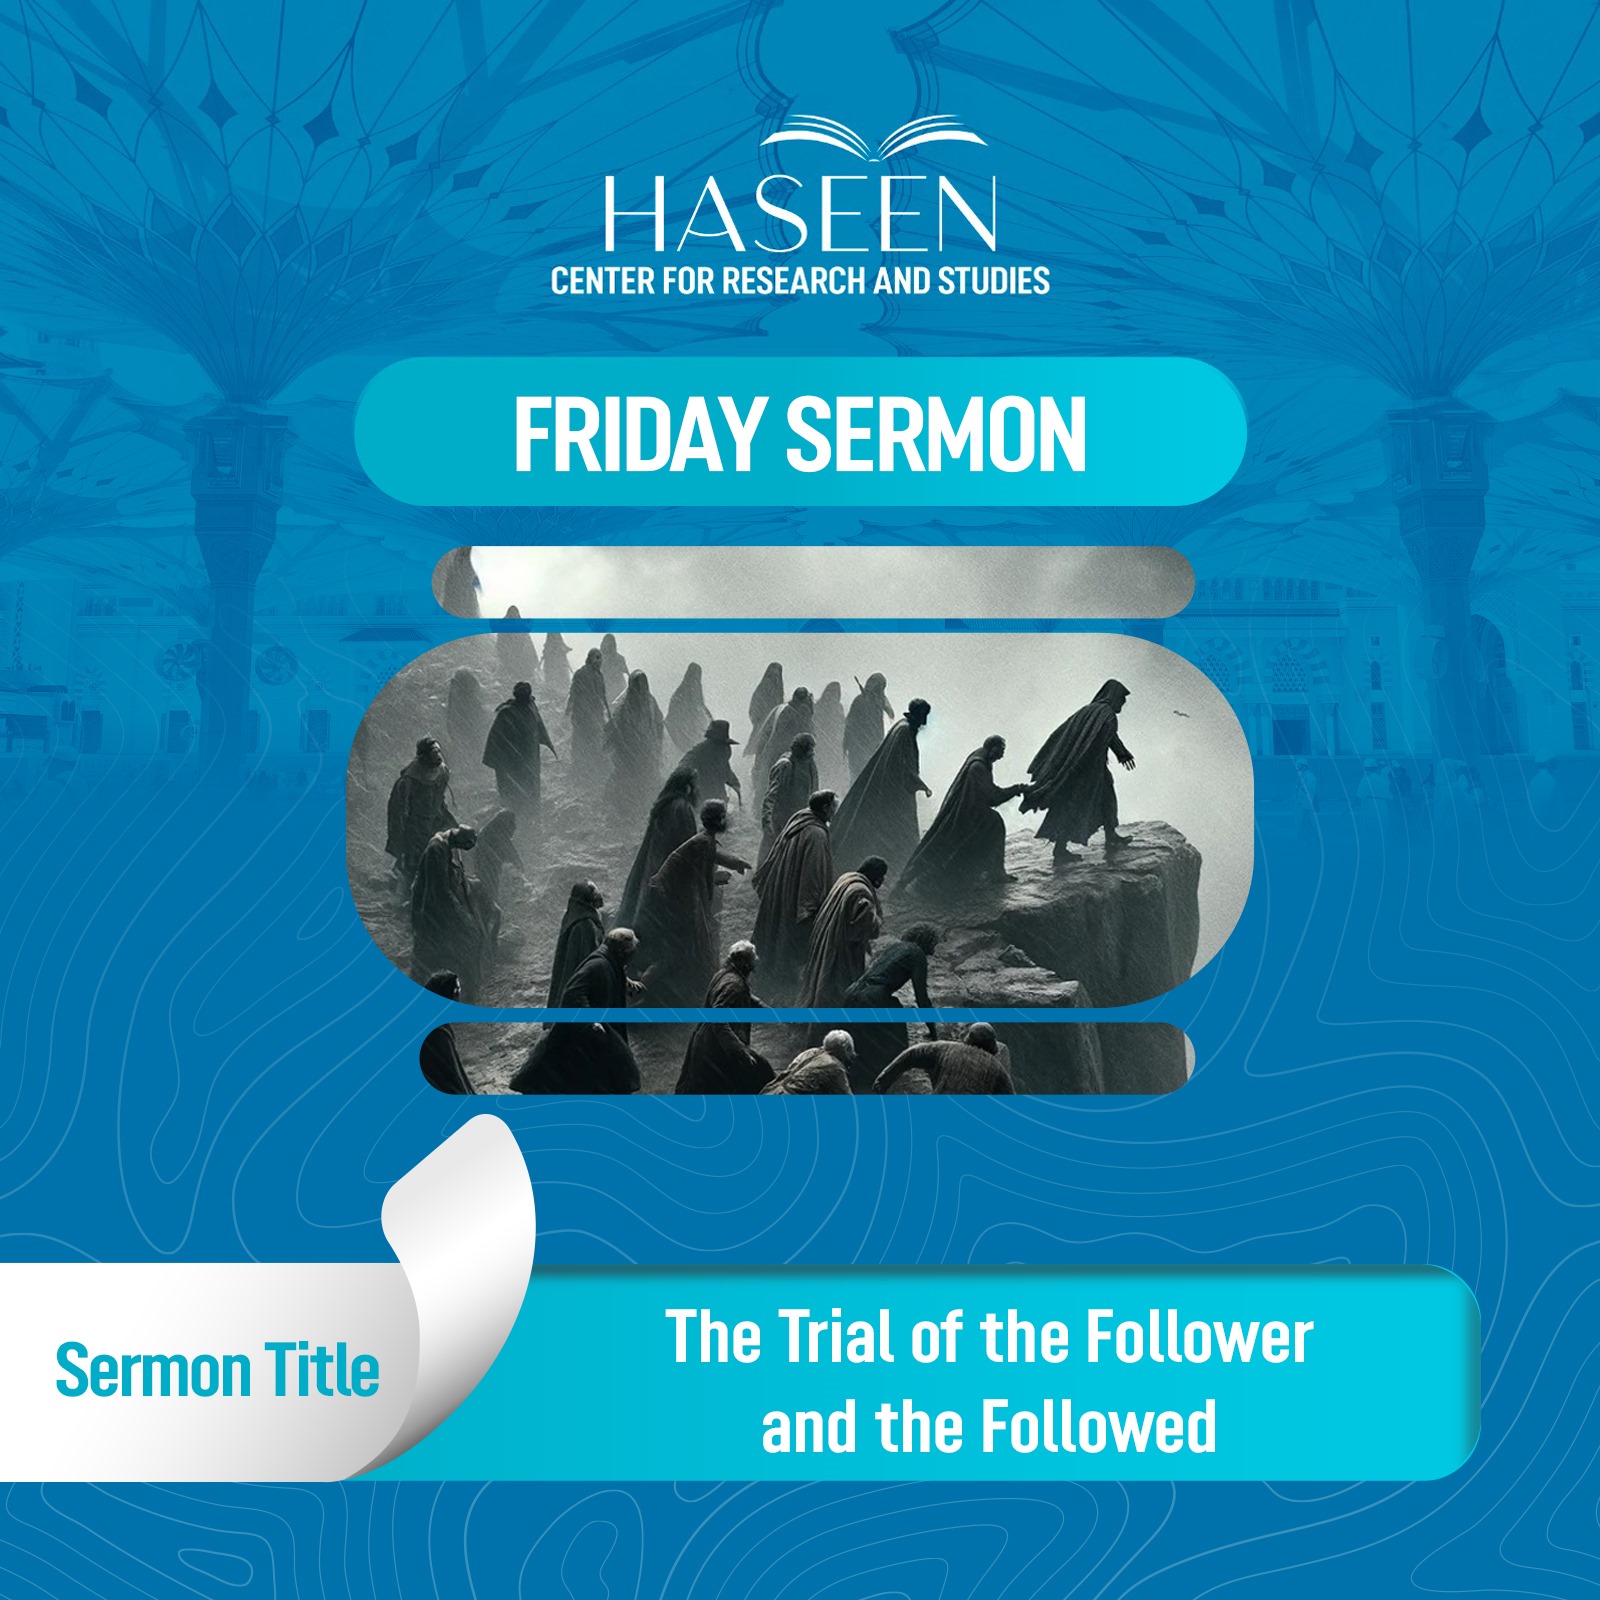 Title of the Sermon: The Trial of the Follower and the Followed